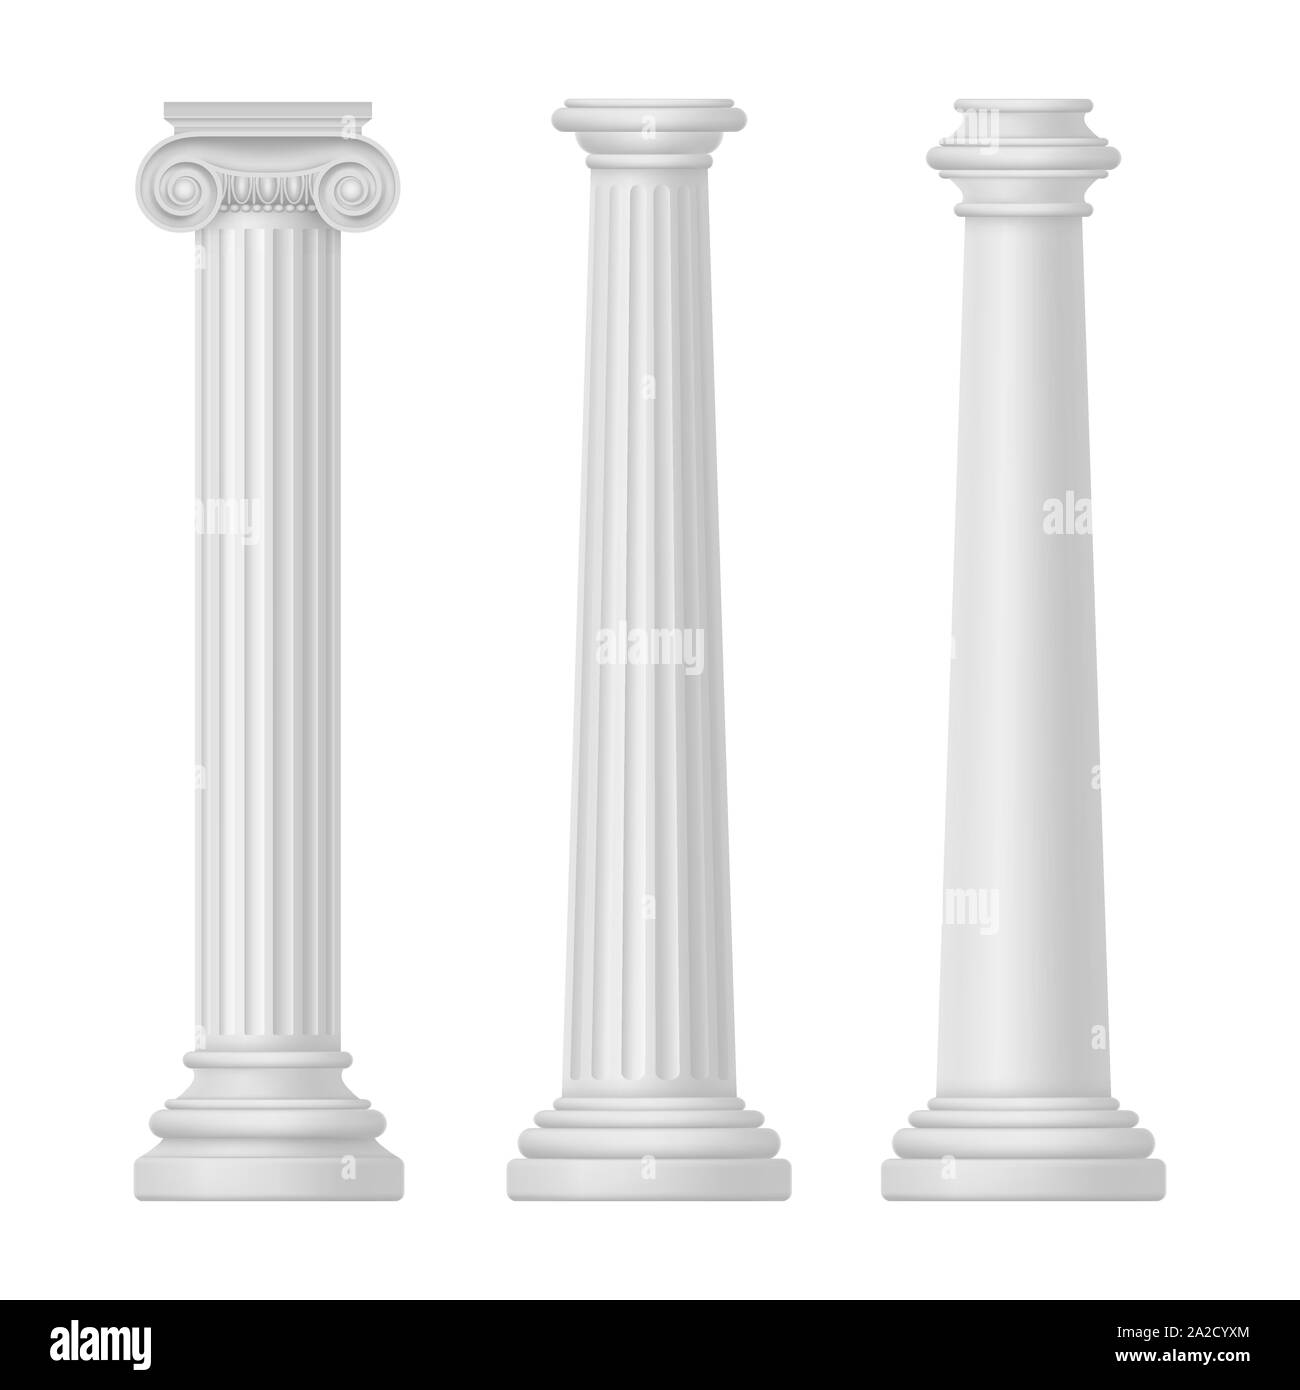 Ionic and tuscan, greek and egypt, rome column Stock Vector